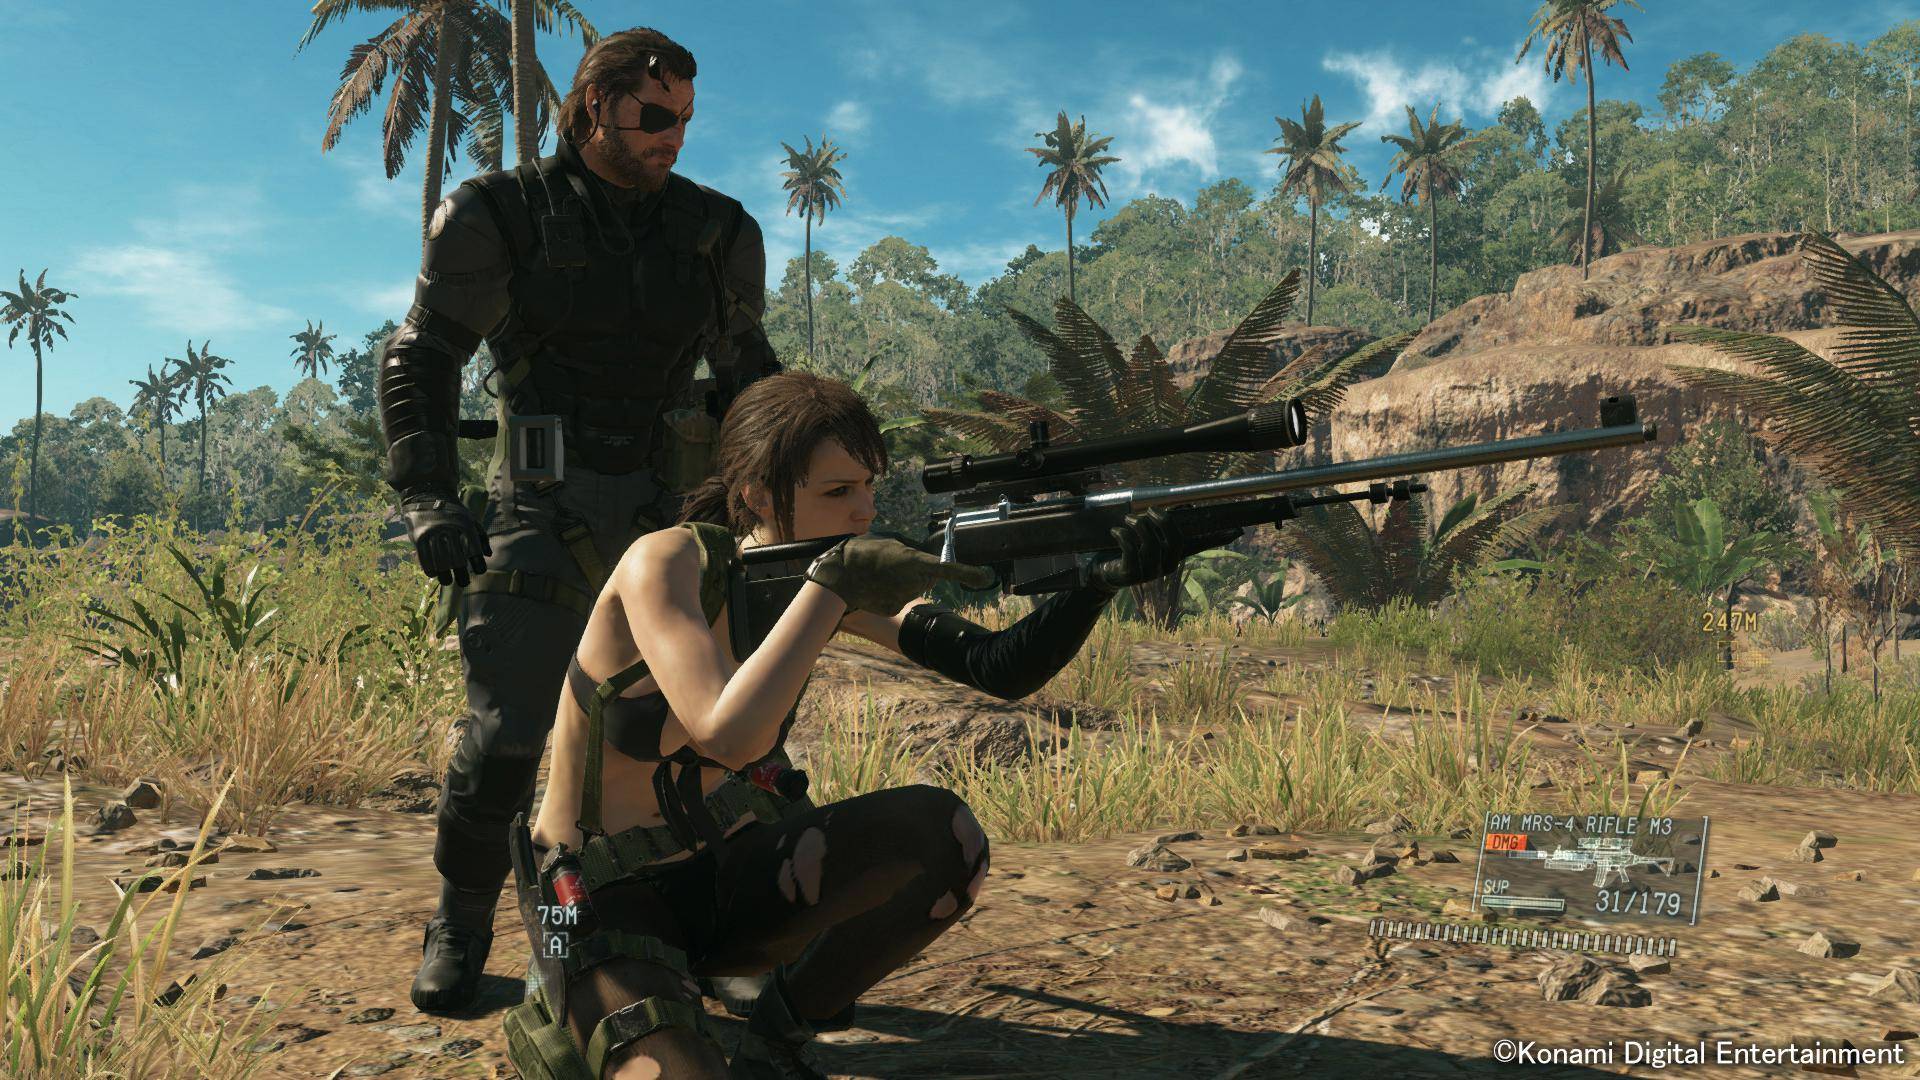 Metal Gear Solid V: The Definitive Experience - Xbox One